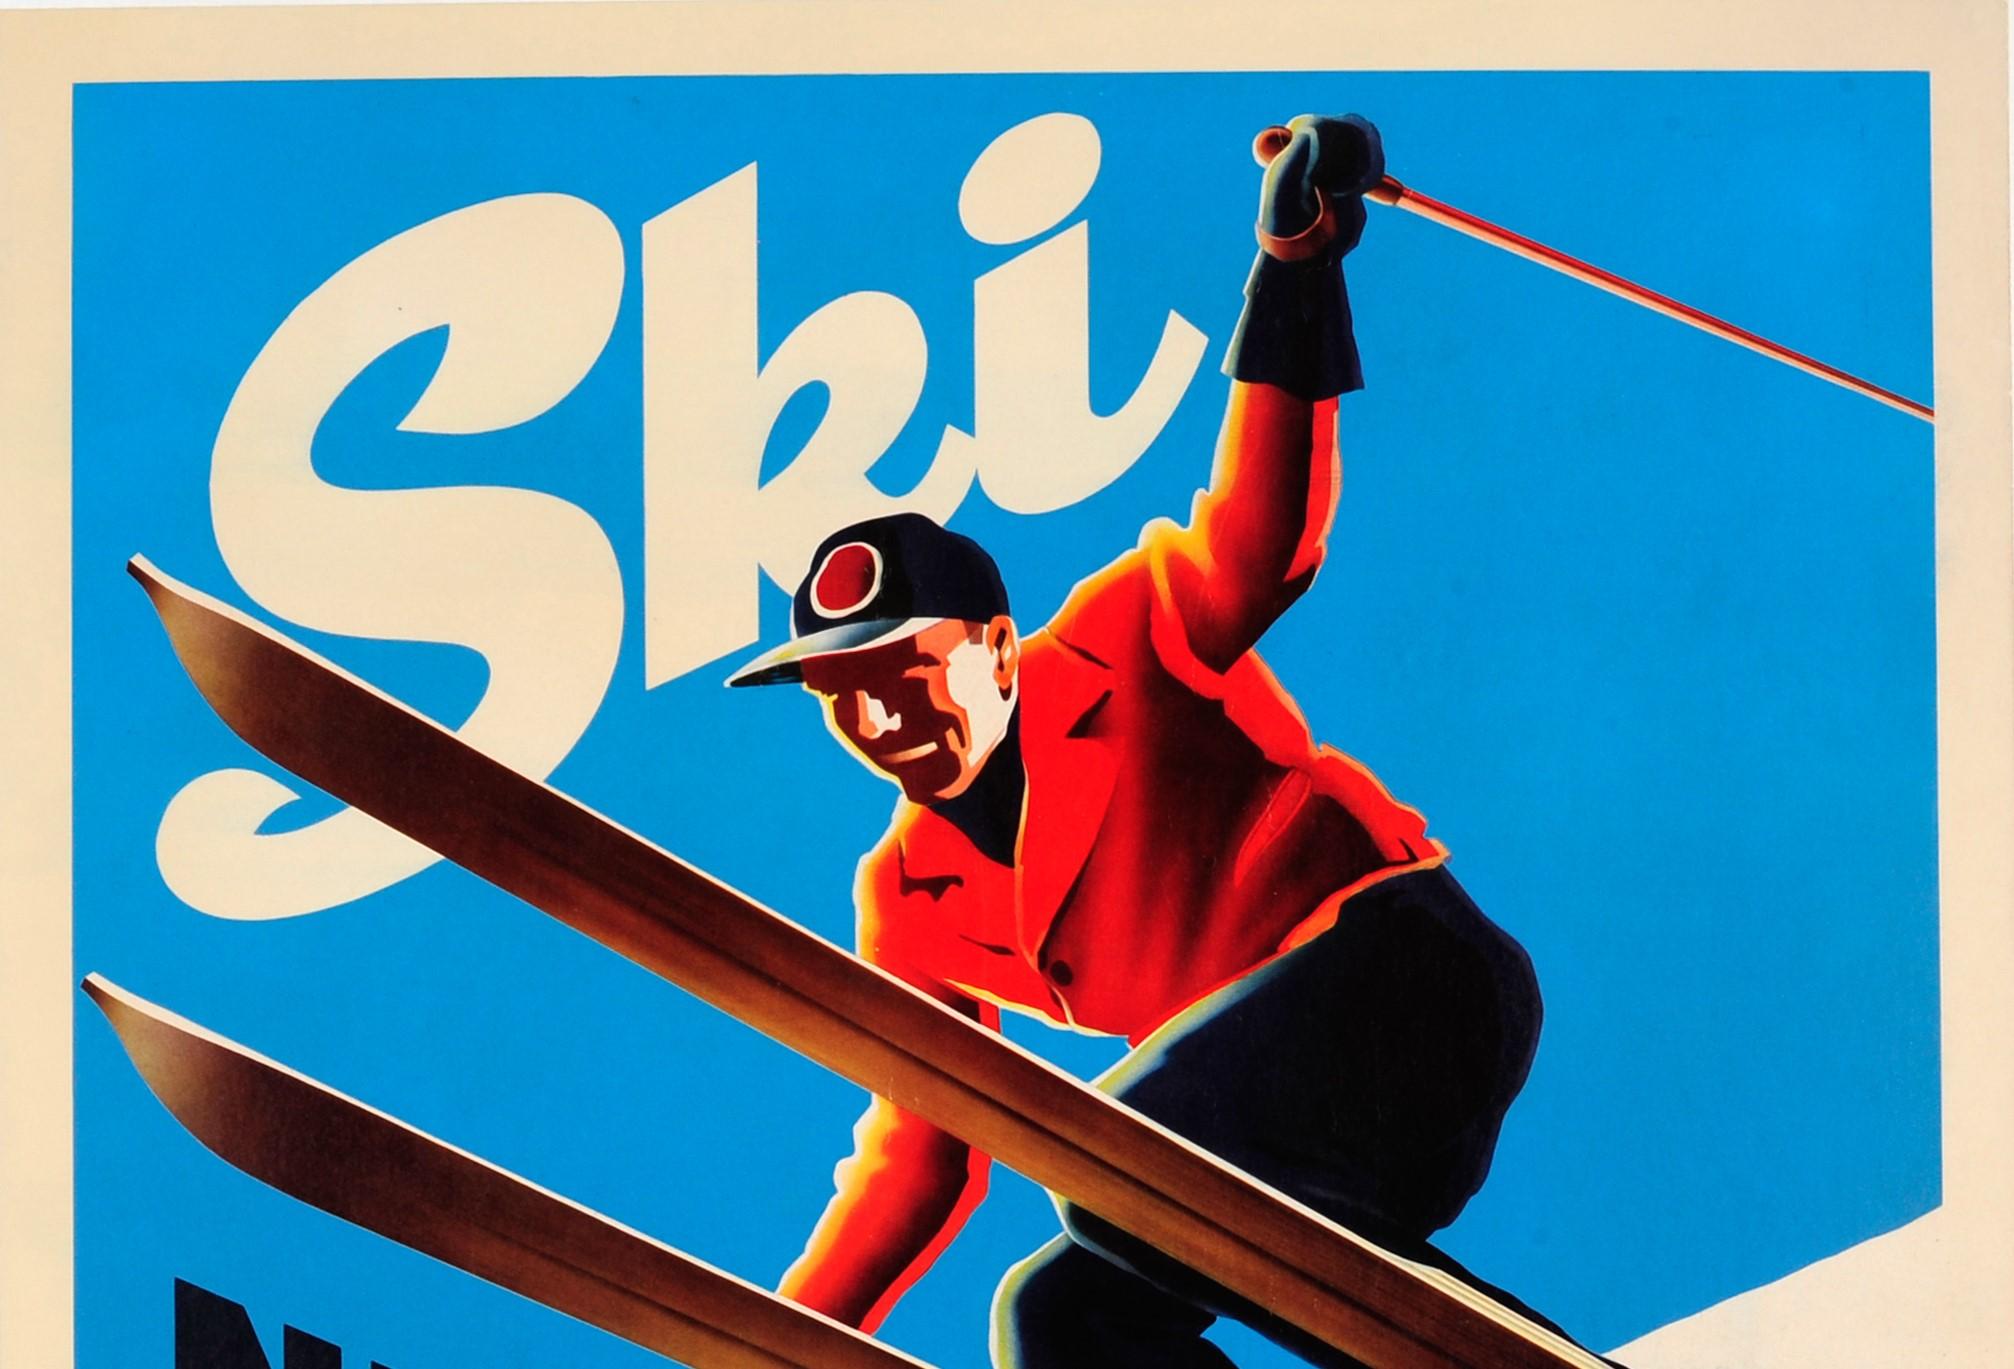 Original vintage Art Deco style ski travel poster - Ski New York - featuring a dynamic illustration of a smiling skier wearing a red jacket and dark blue cap with his arms outstretched, jumping through the air on wooden skis against the blue sky